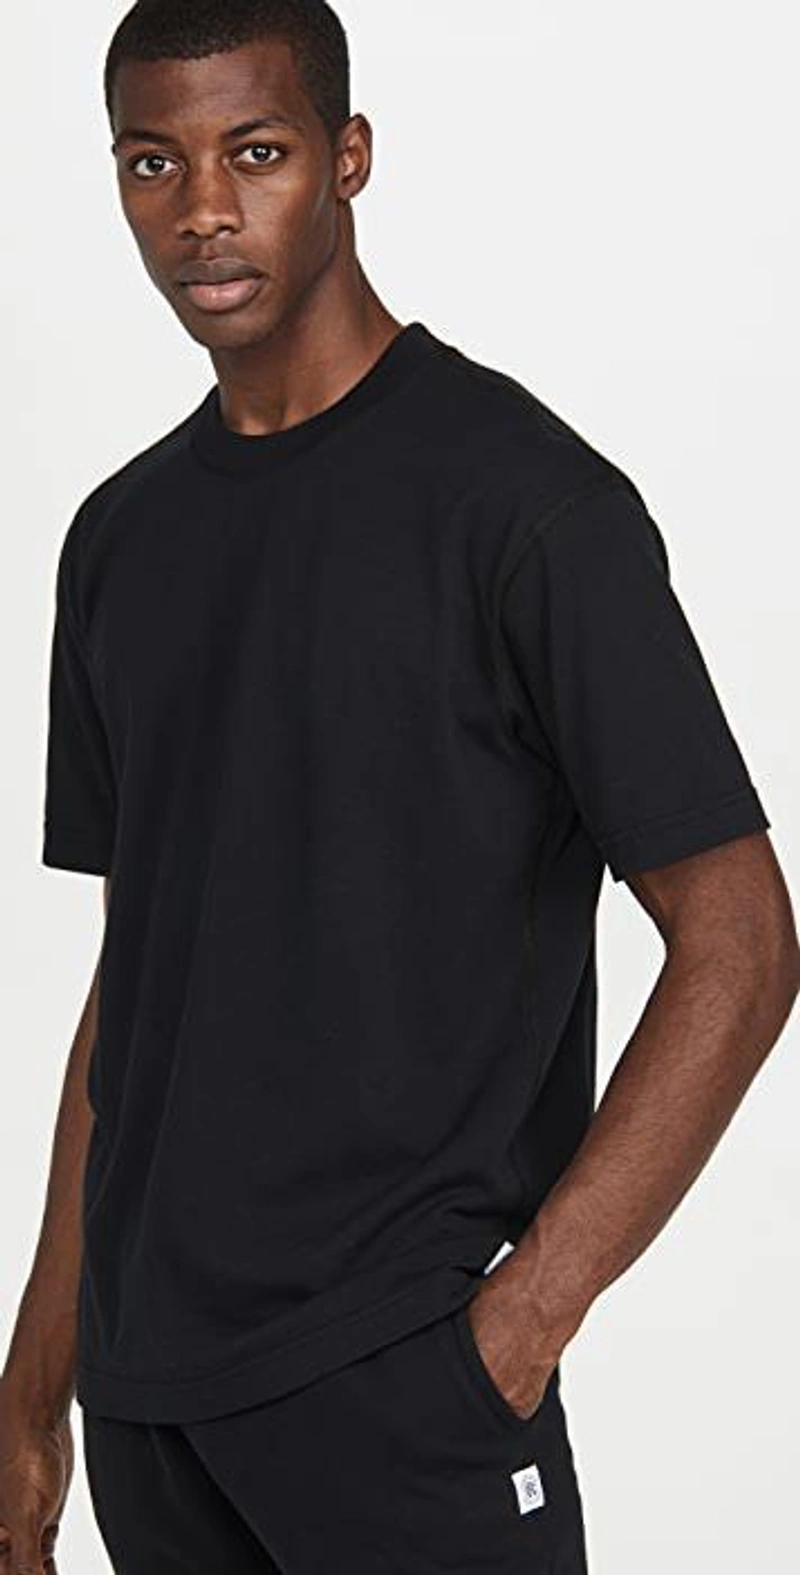 shopbop.com's Posts | 搭配: Reigning Champ Short Sleeve T-shirt In Black；Reigning Champ Terry Slim Sweatpants In Navy；Apl Athletic Propulsion Labs Techloom Breeze Running Sneakers In Black